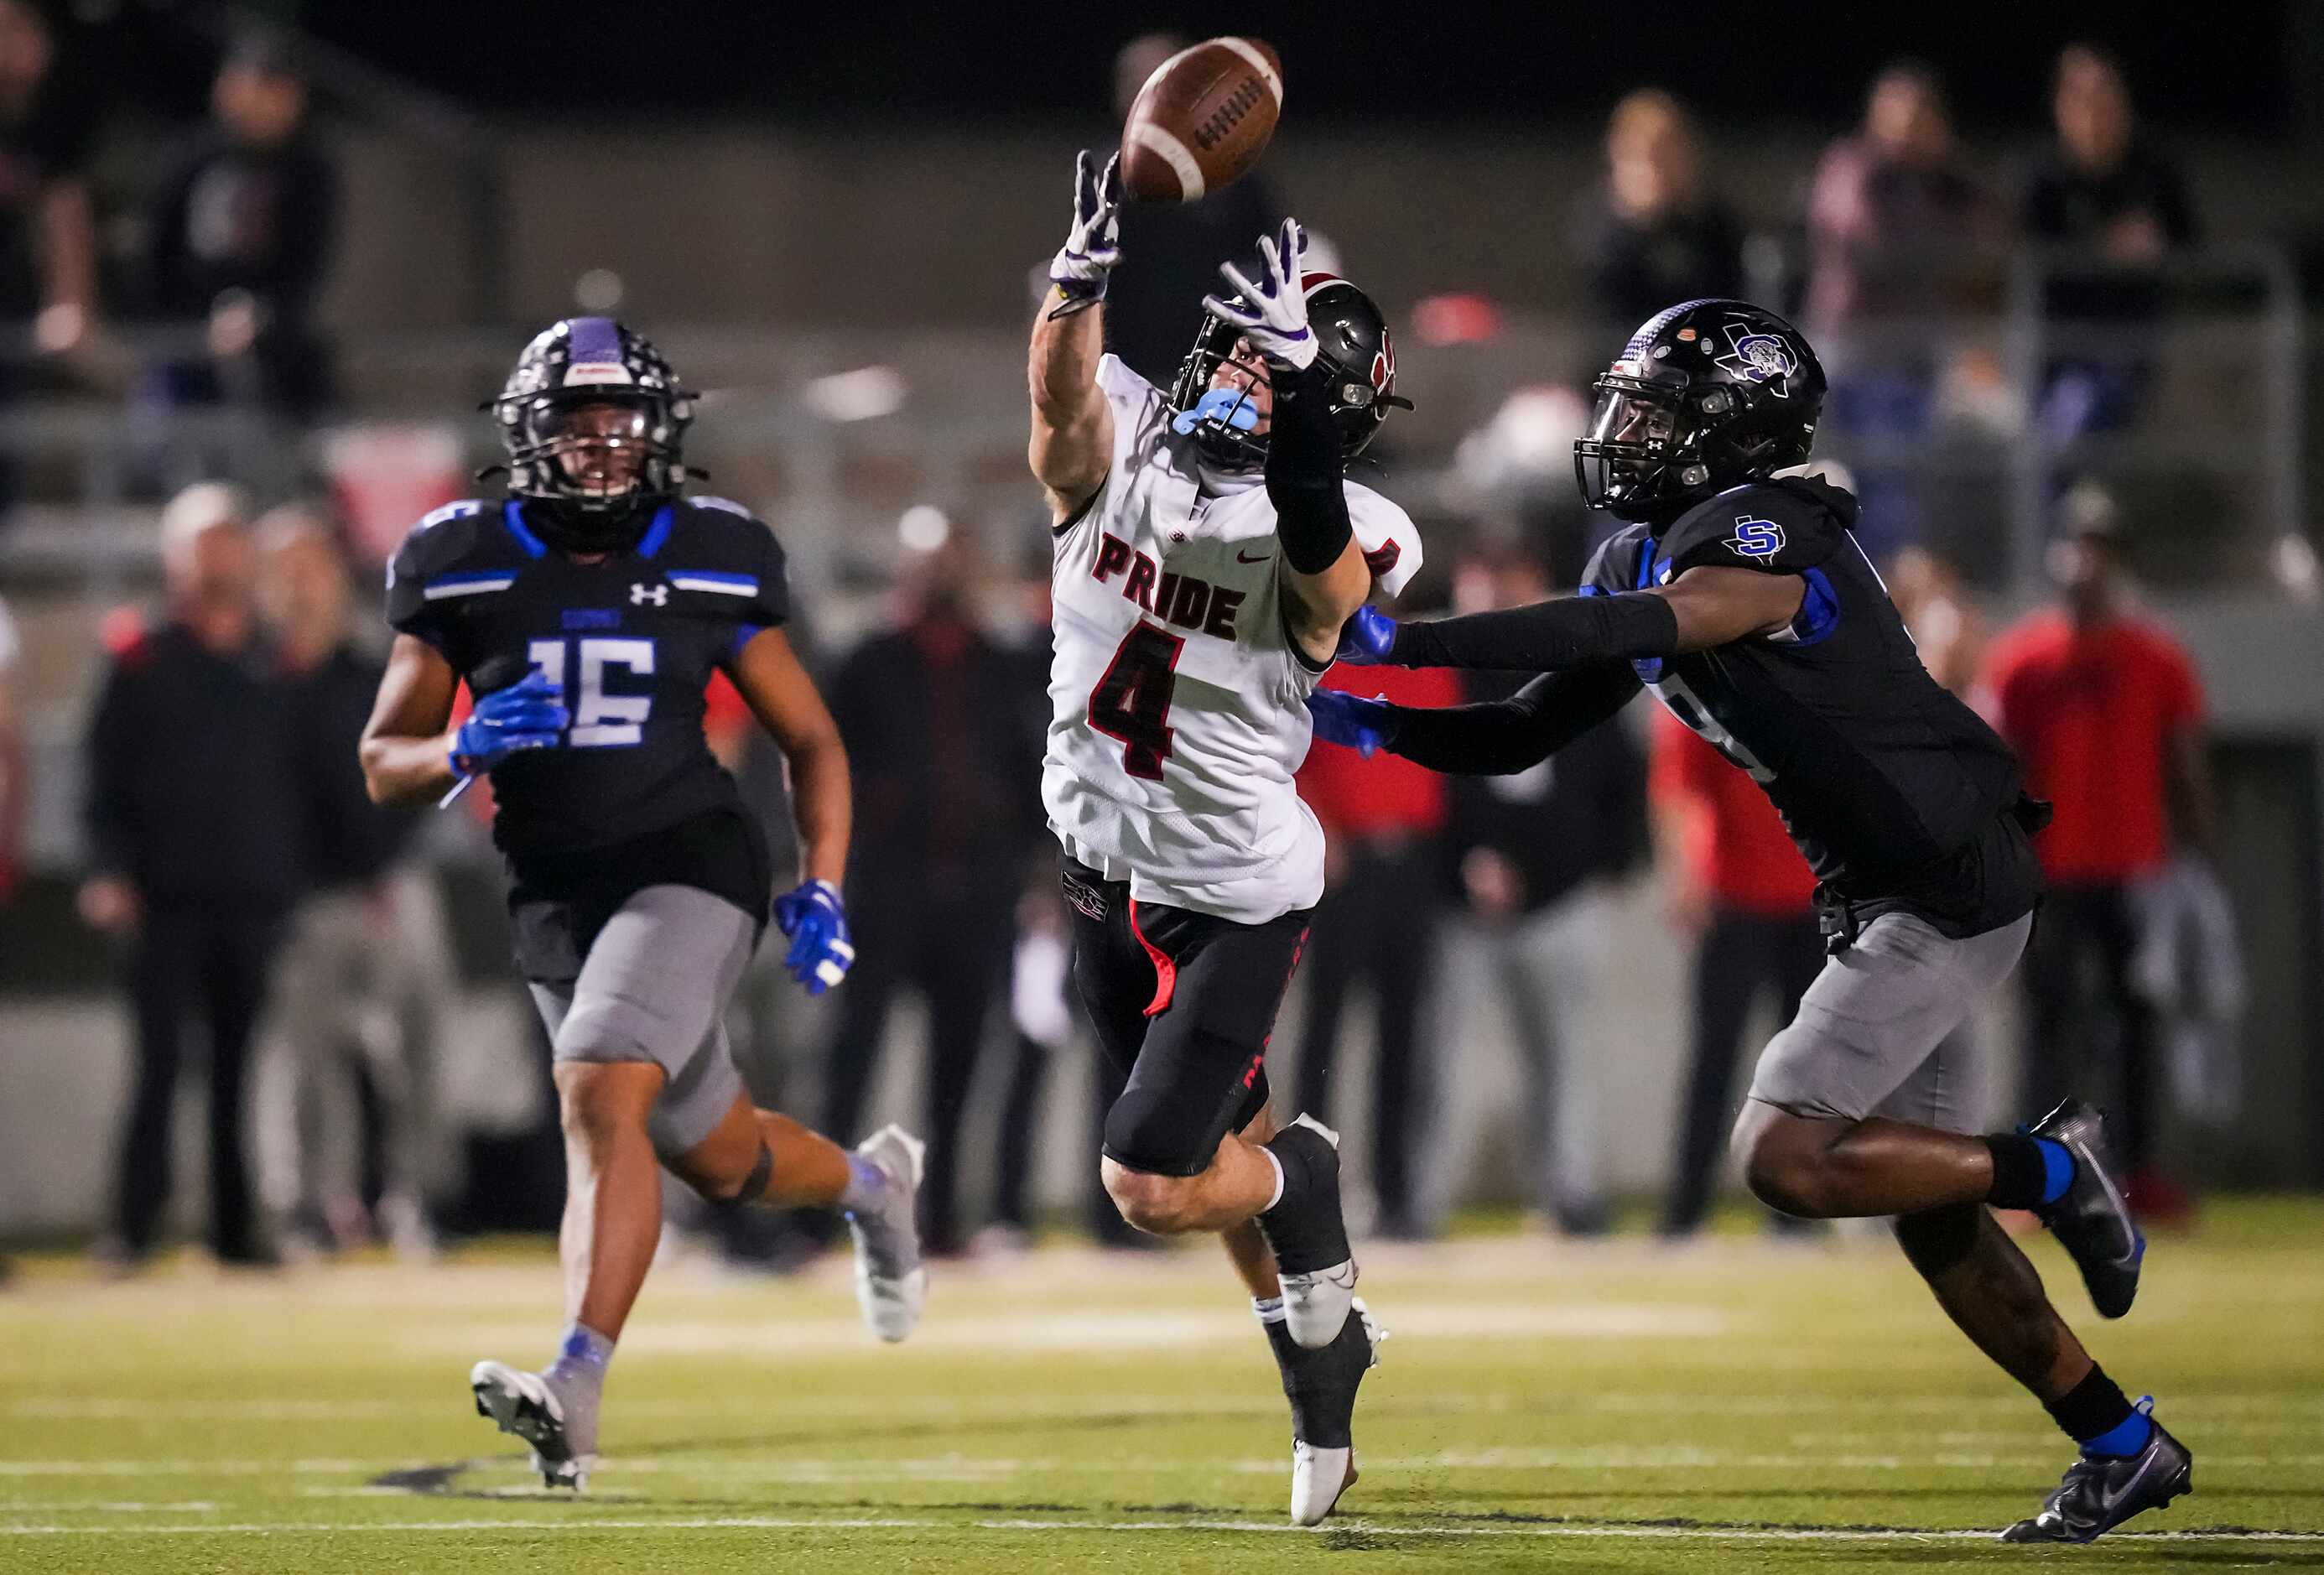 Colleyville Heritage wide receiver Hogan Wasson (4) has a pass go off his hands as Mansfield...